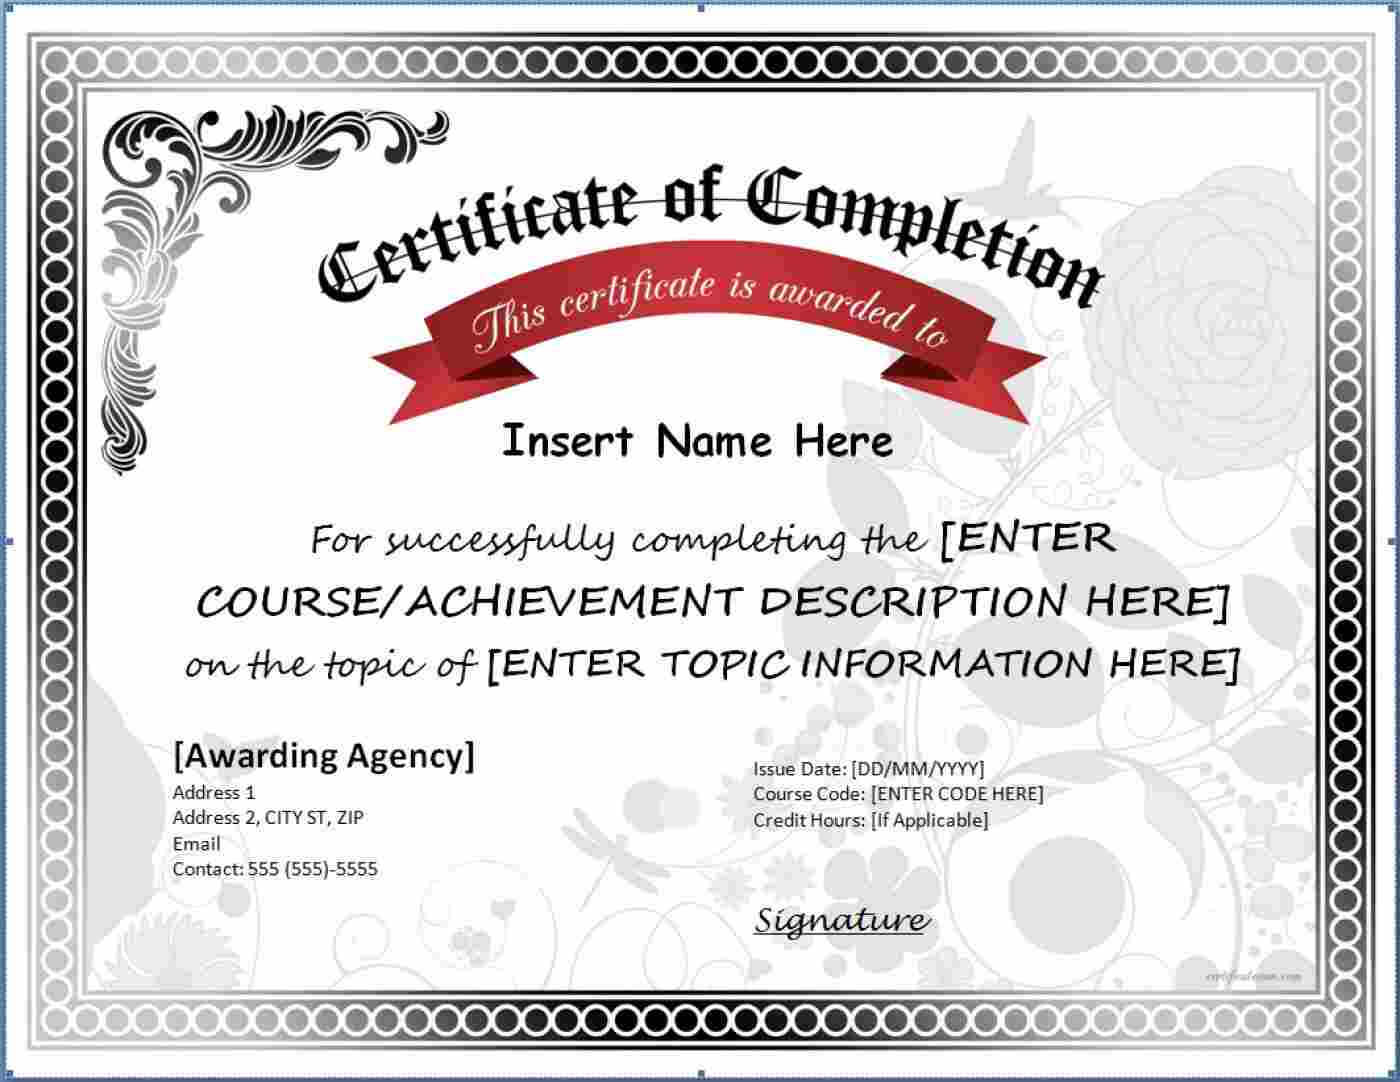 005 Certificate Of Completion Template Free Printable Within Certificate Of Completion Template Free Printable